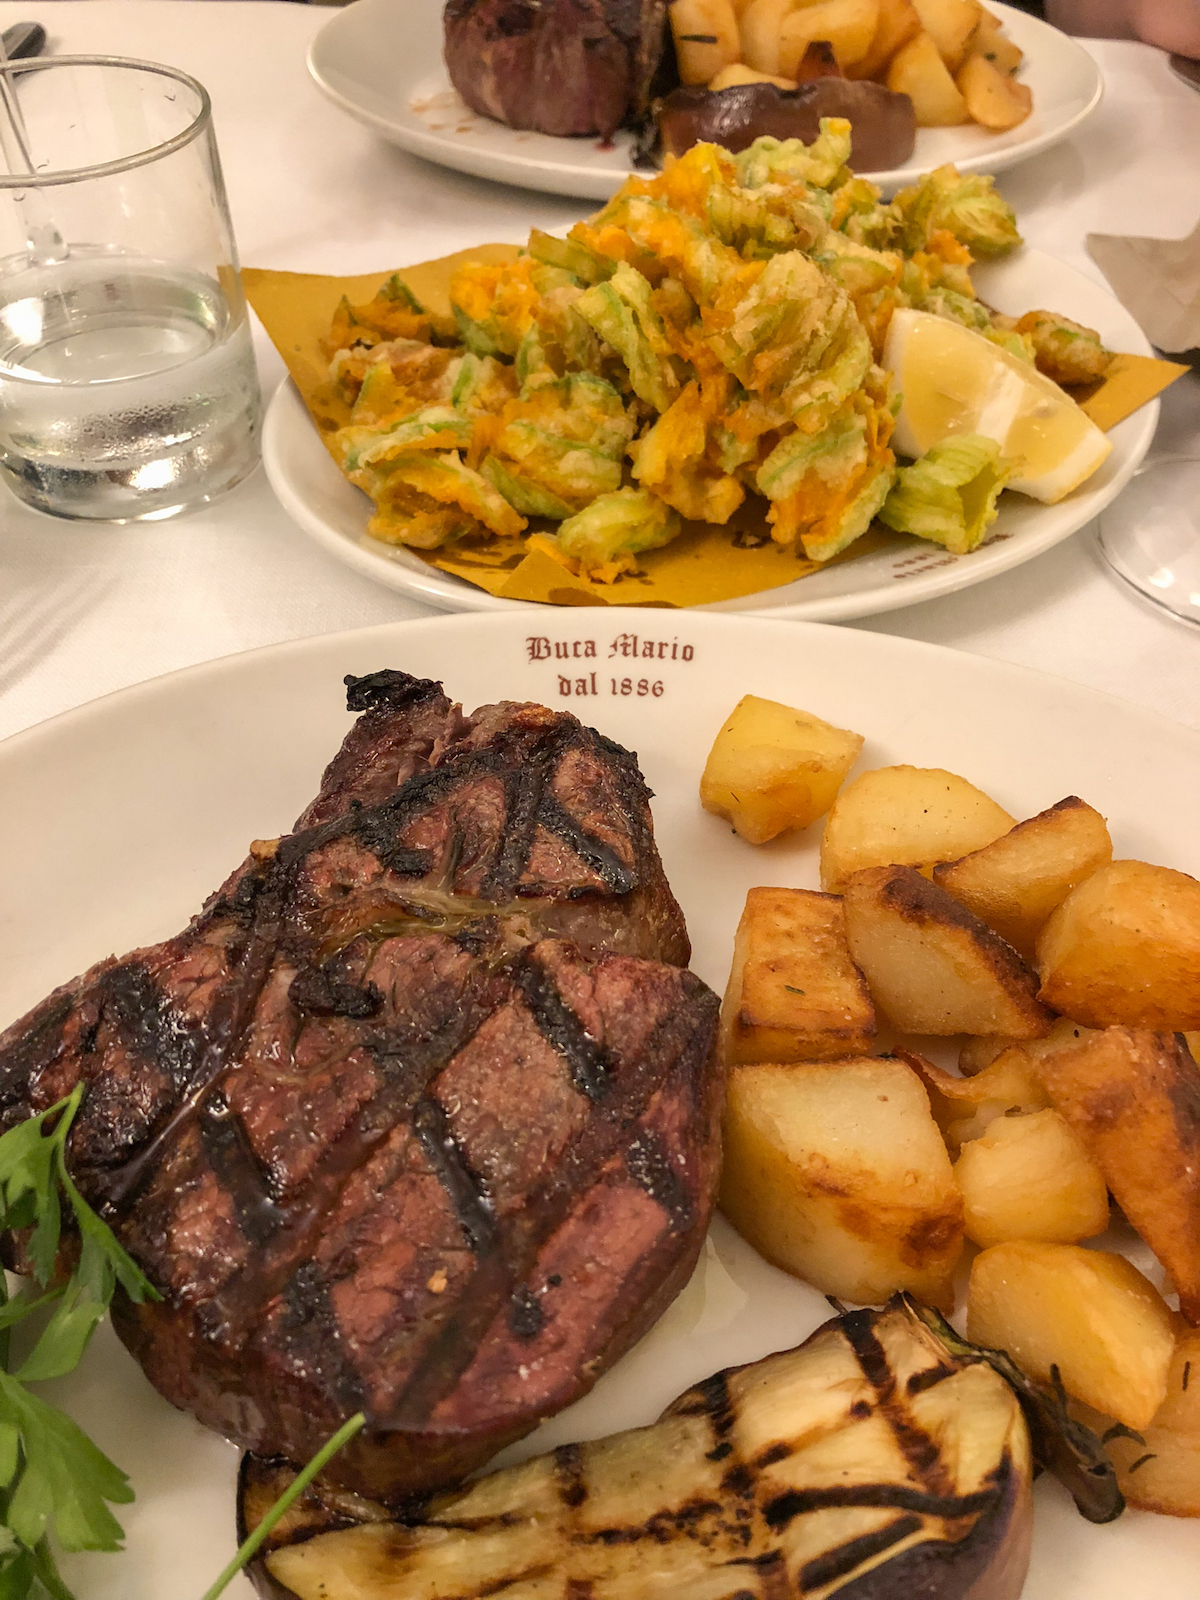 Grilled steak on a plate beside cubed potatoes, with other dishes visible on the table in the background